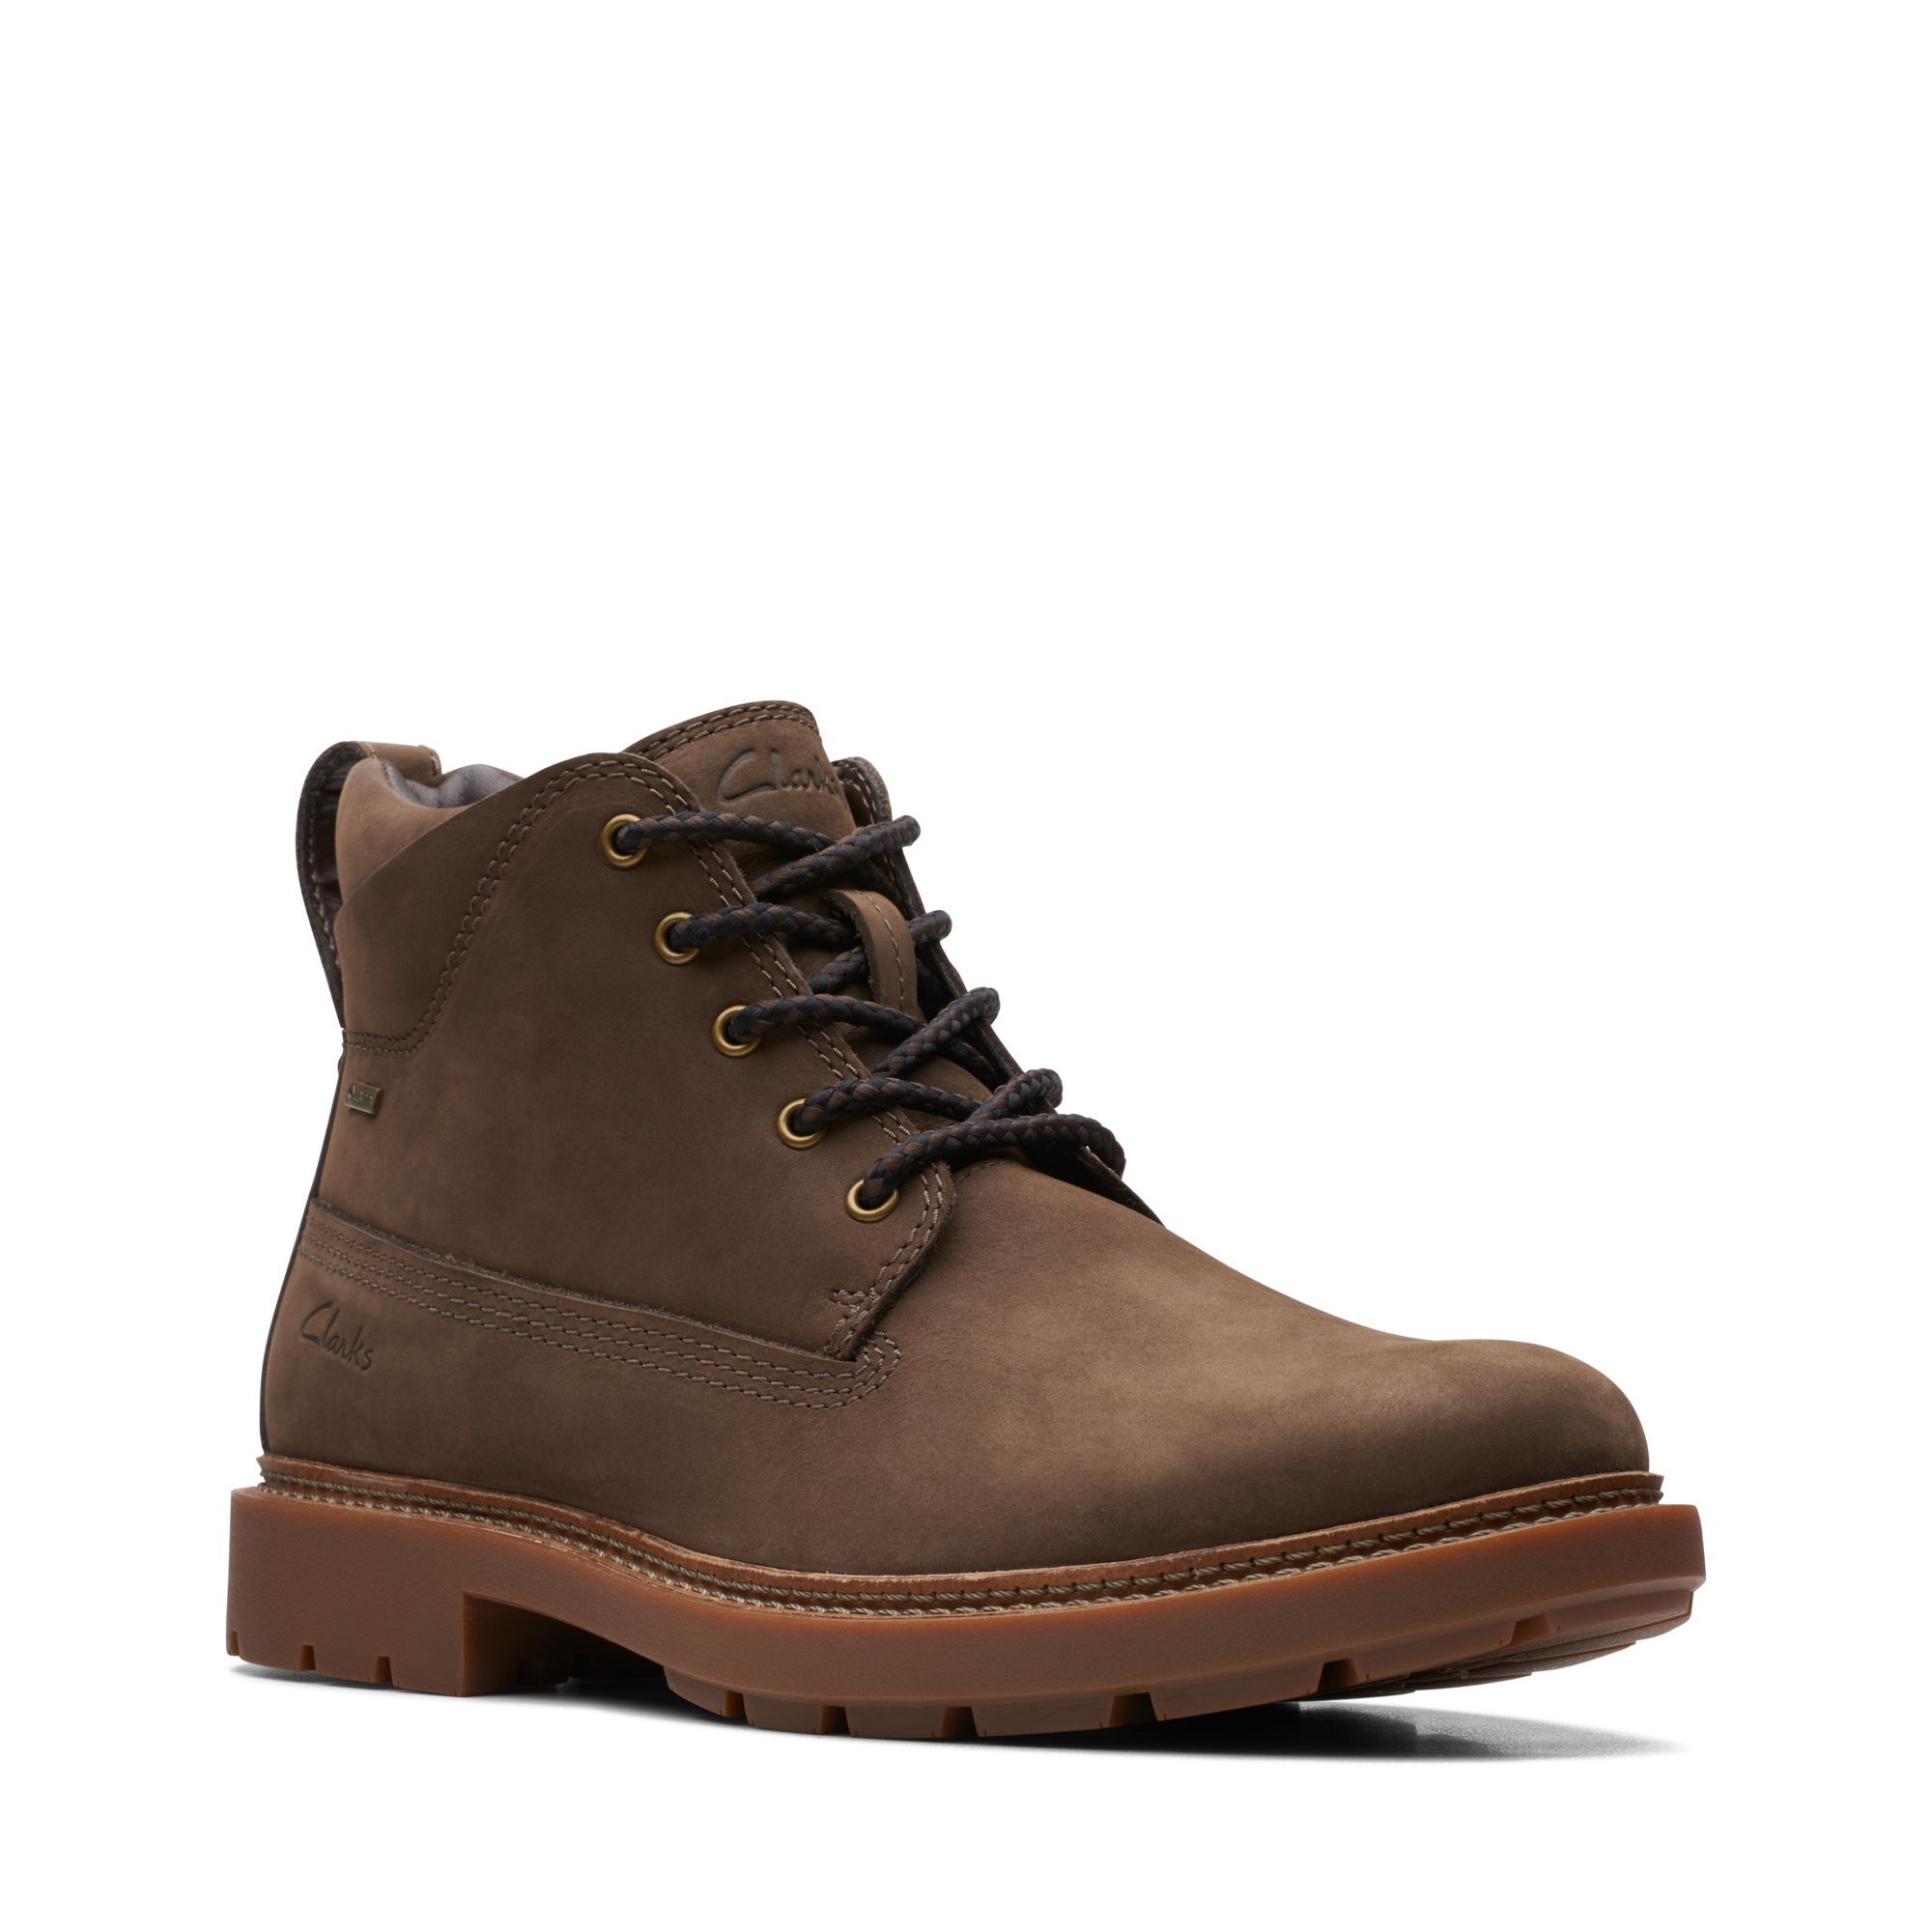 Craftdale 2 Mgtx - Brown Nubuck leather